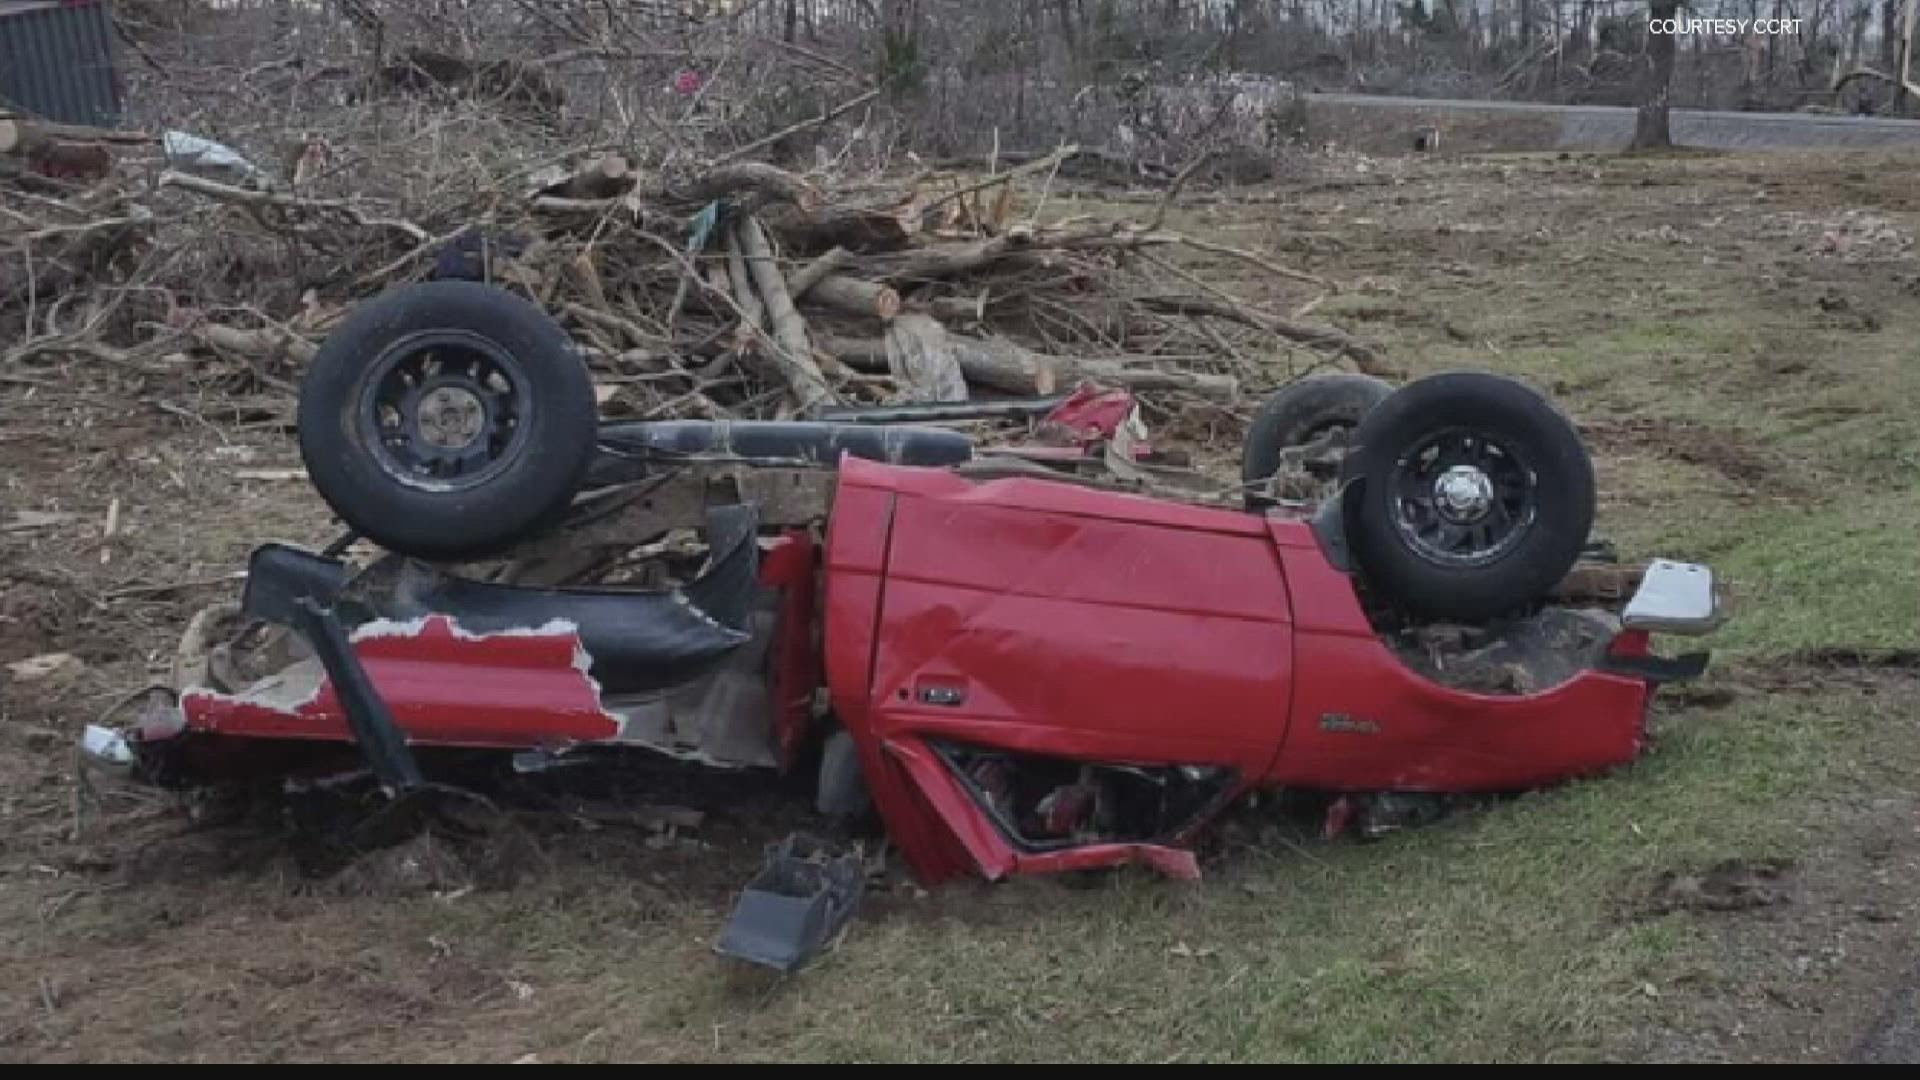 Deadly tornadoes wrecked the area on Dec. 10.